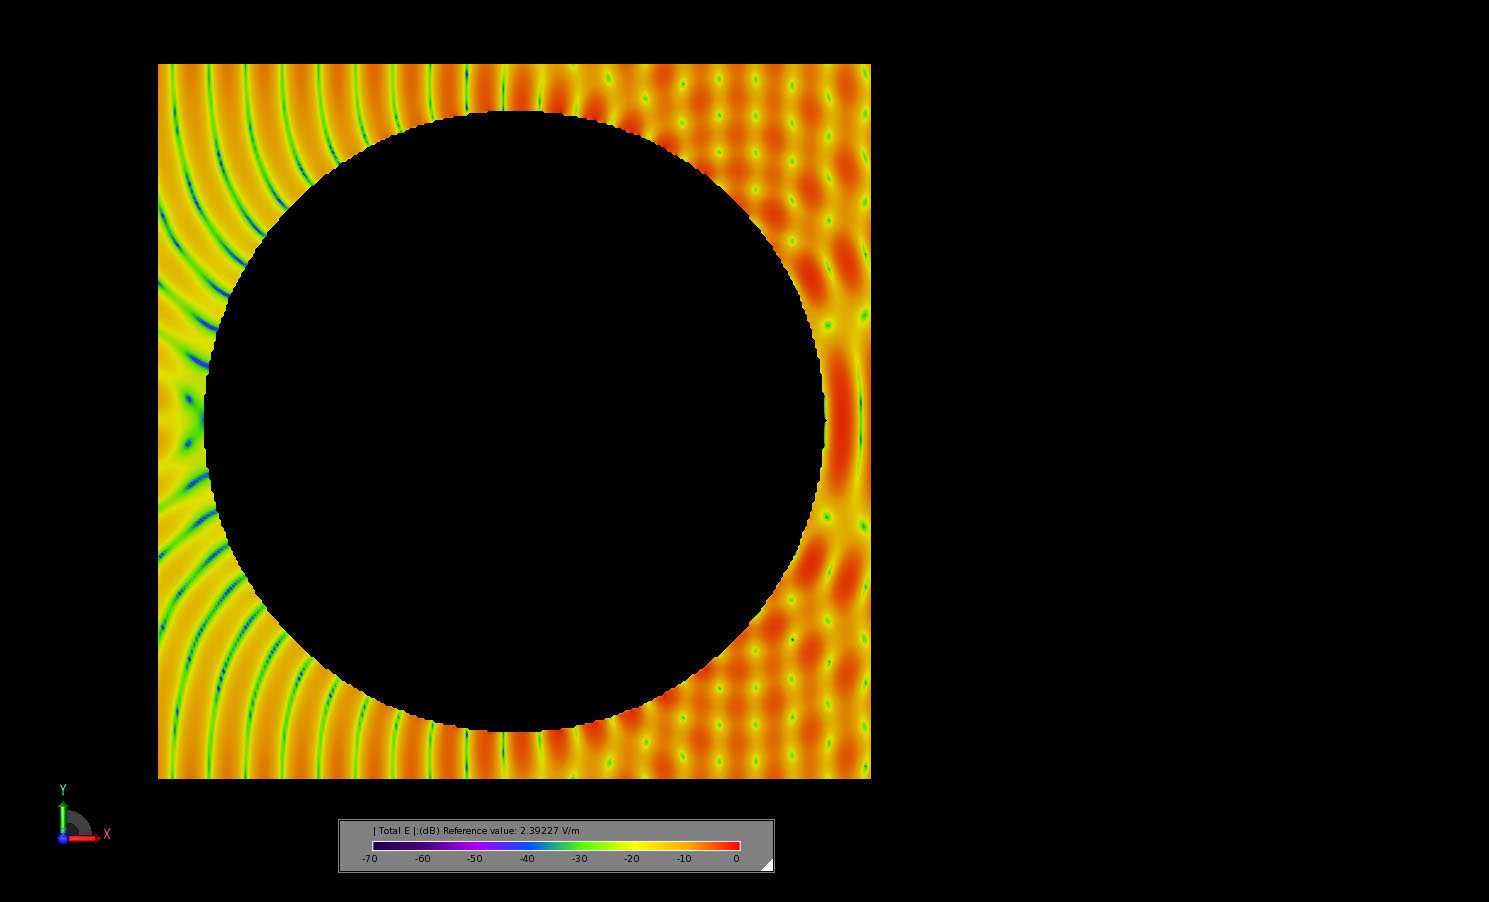 Figure 9The transient electric field in a slice through the center of the sphere a time when the fields have reached steady-state.